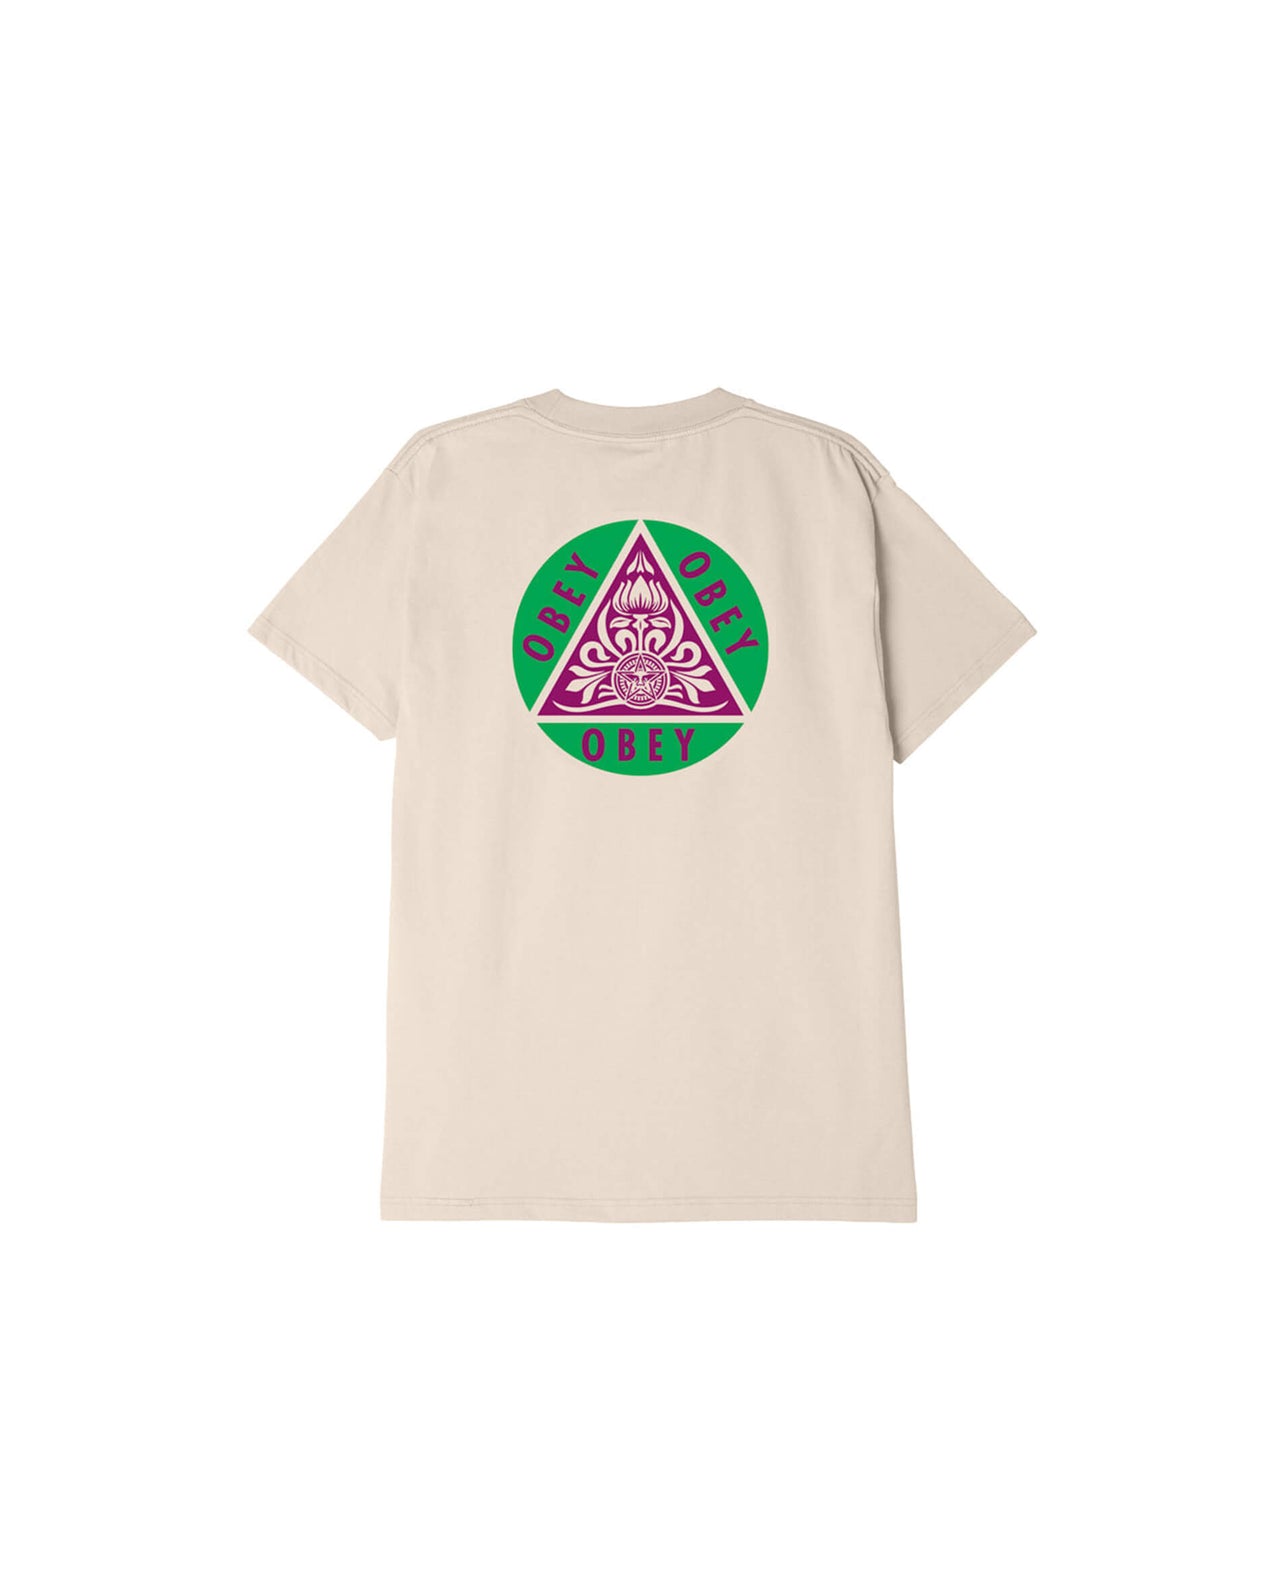 Obey Pyramid Classic Tee